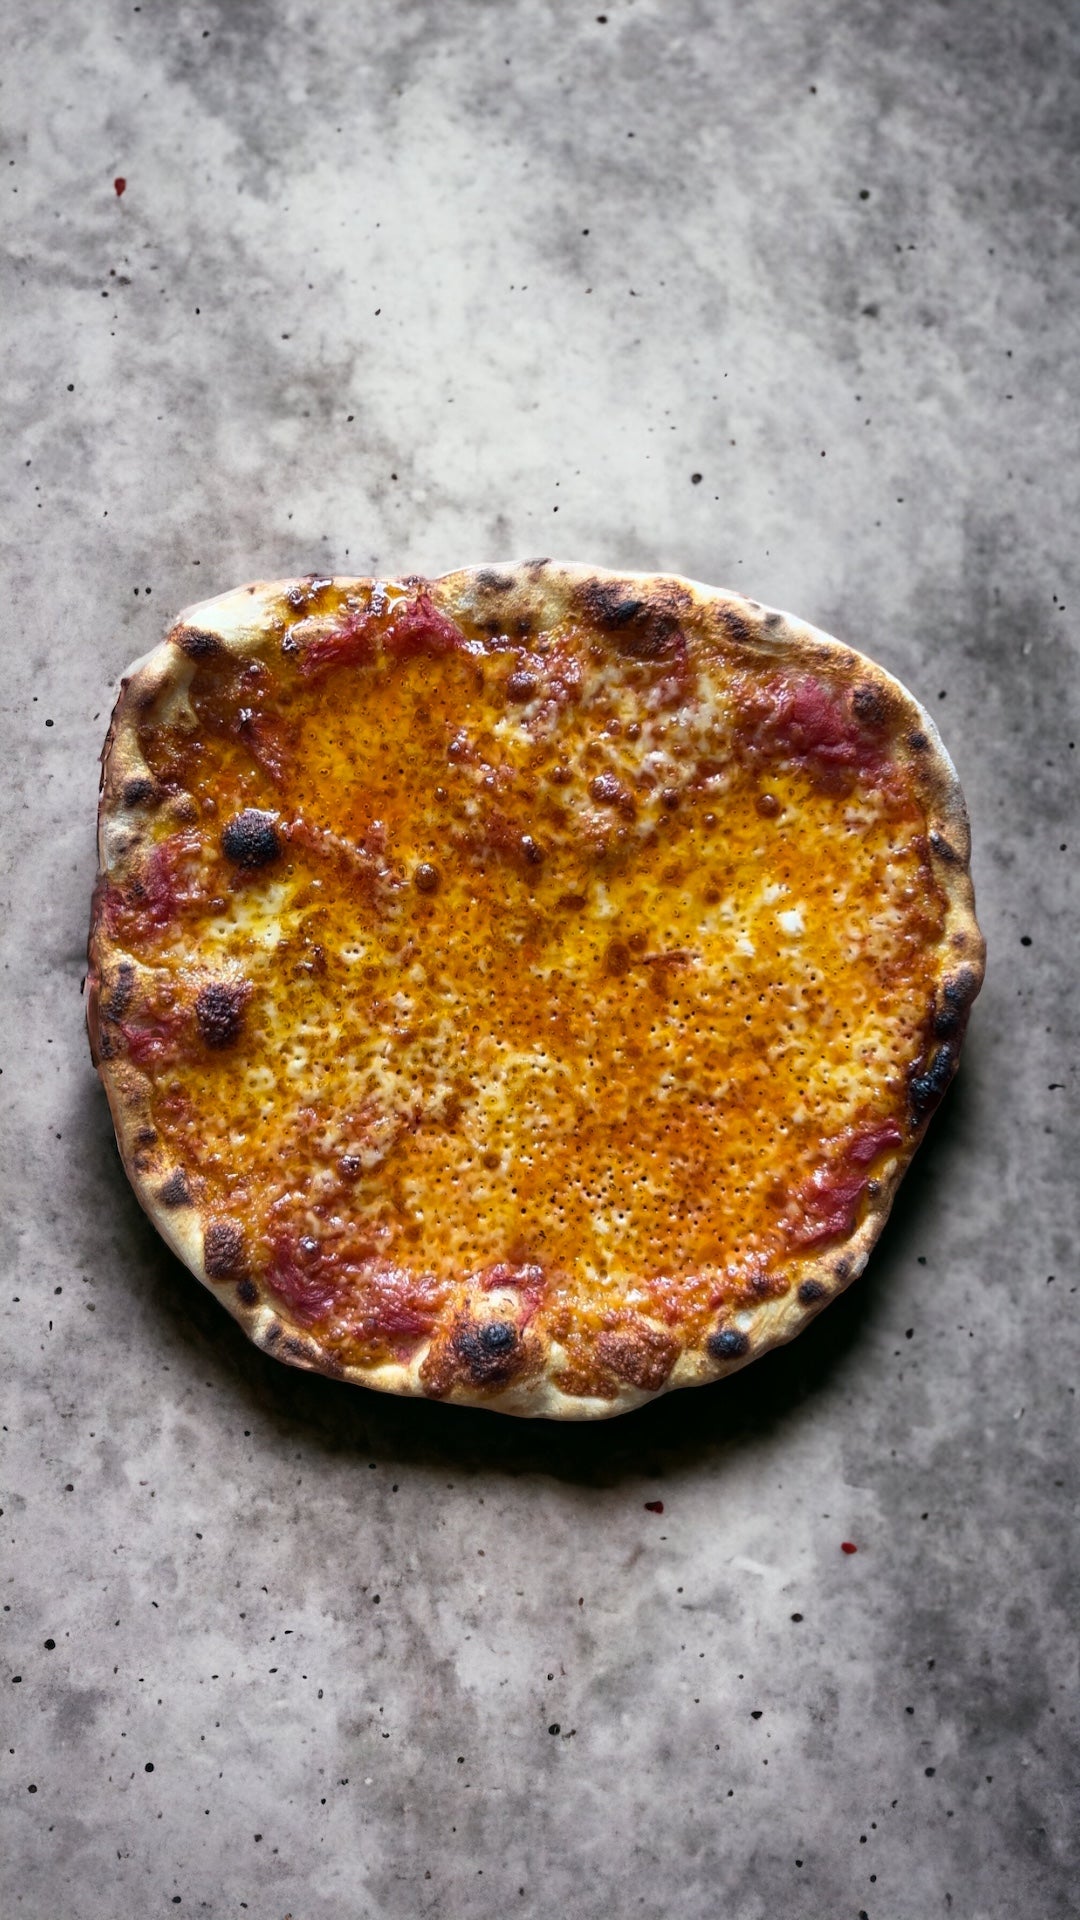 How To Make Ultra-Thin Crispy Pizza In A Home Oven